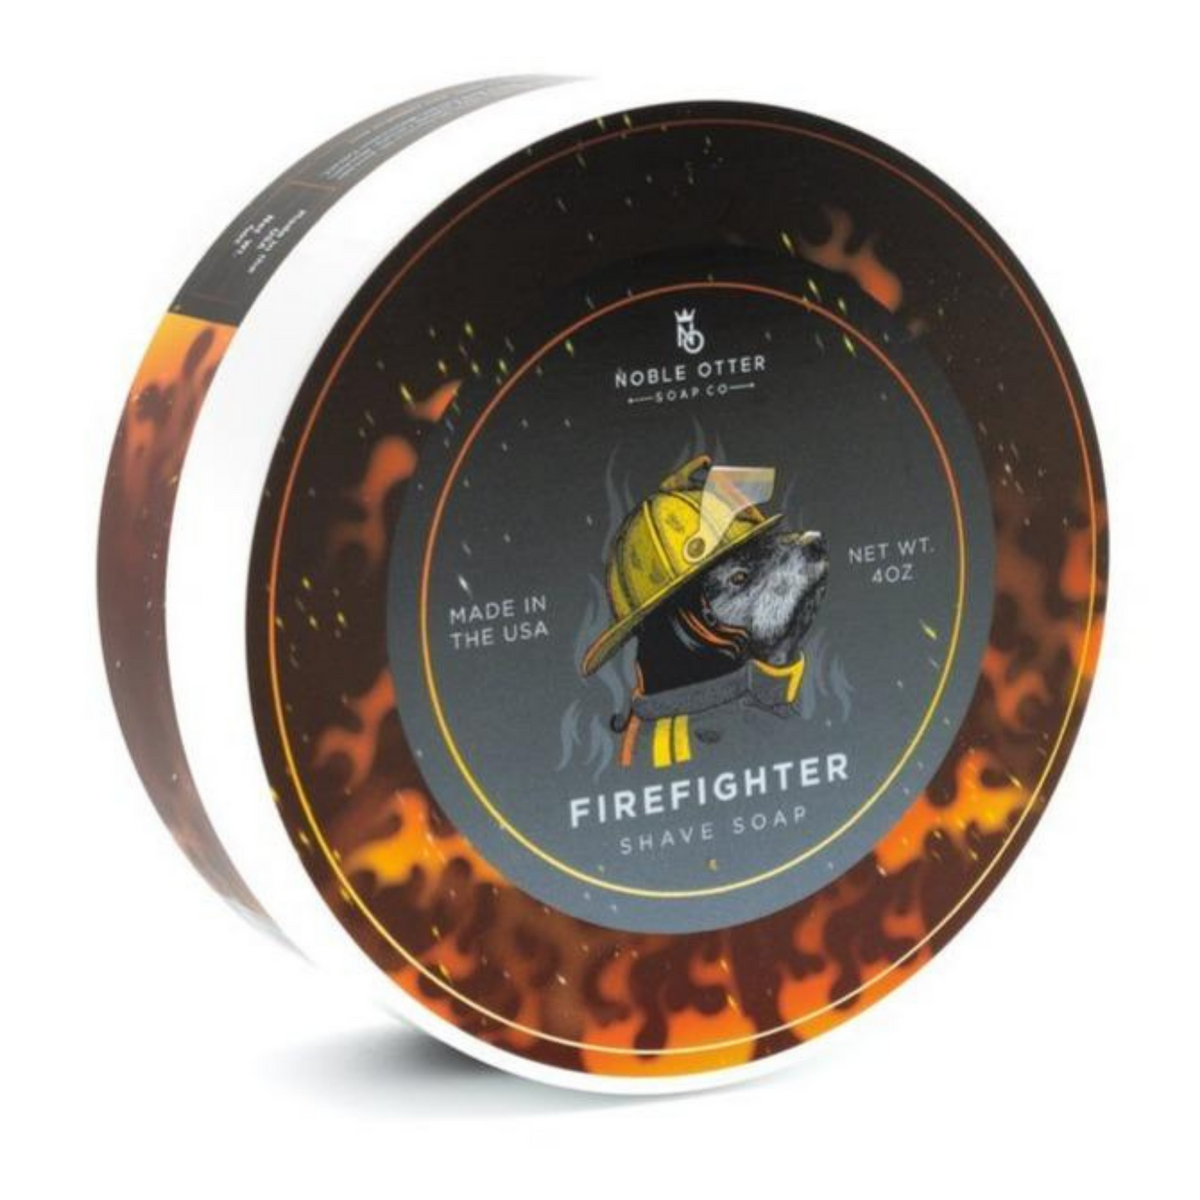 Primary Image of Firefighter Shave Soap